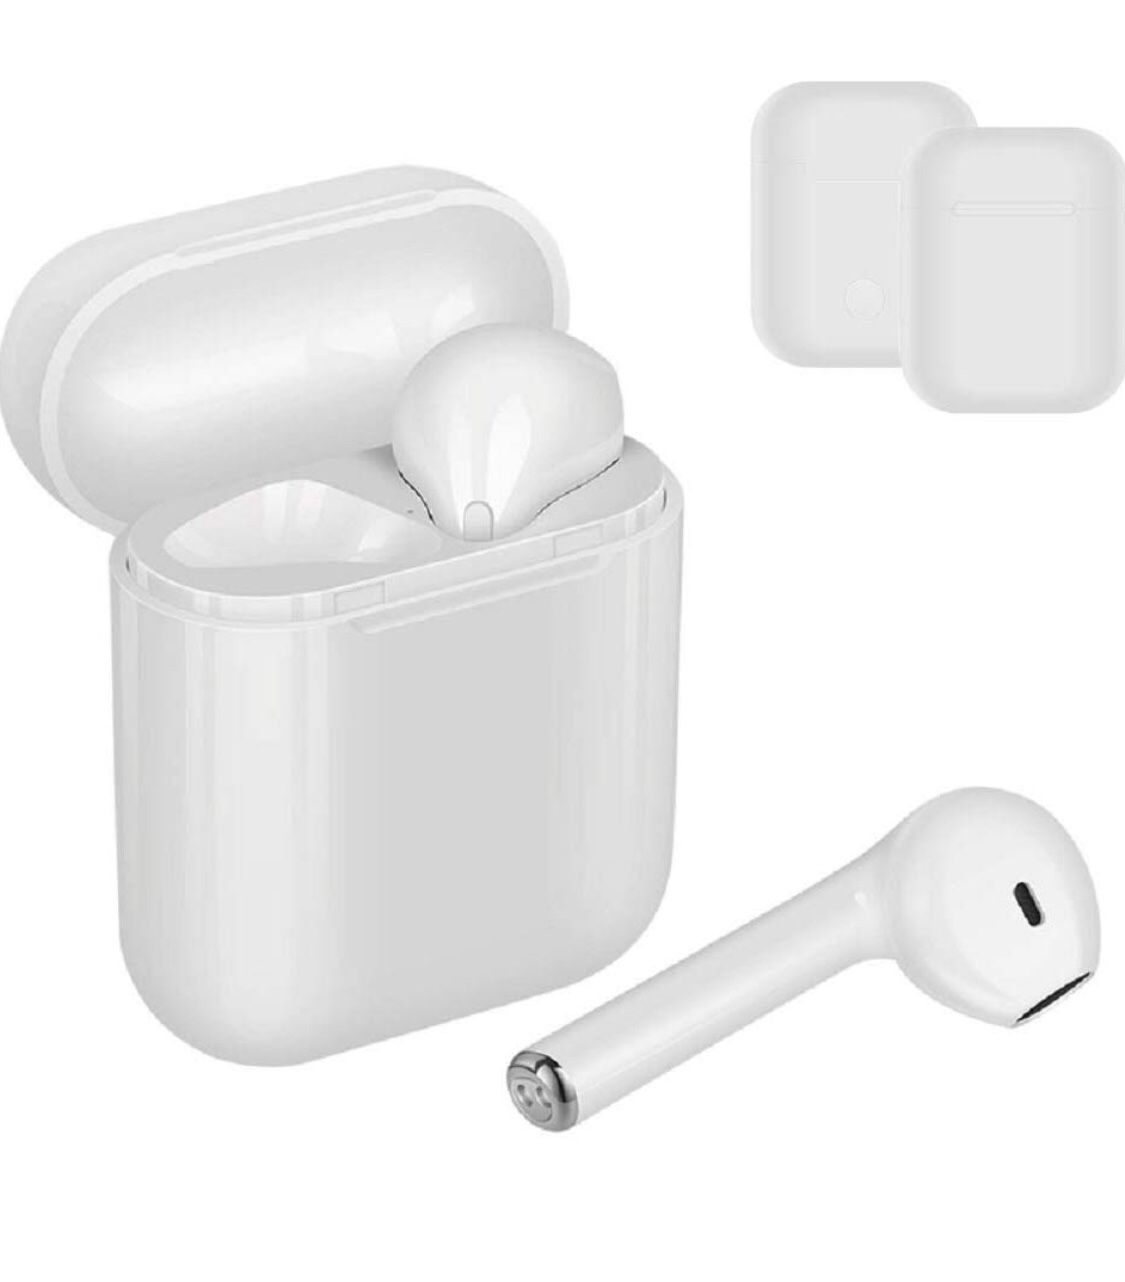 TWS-I8X Bluetooth Earbuds, Wireless Headphones, Compatible iPhone X/8/8 Plus 7/7 Plus 6/6s Plus Android, Samsung Smartphones (White)